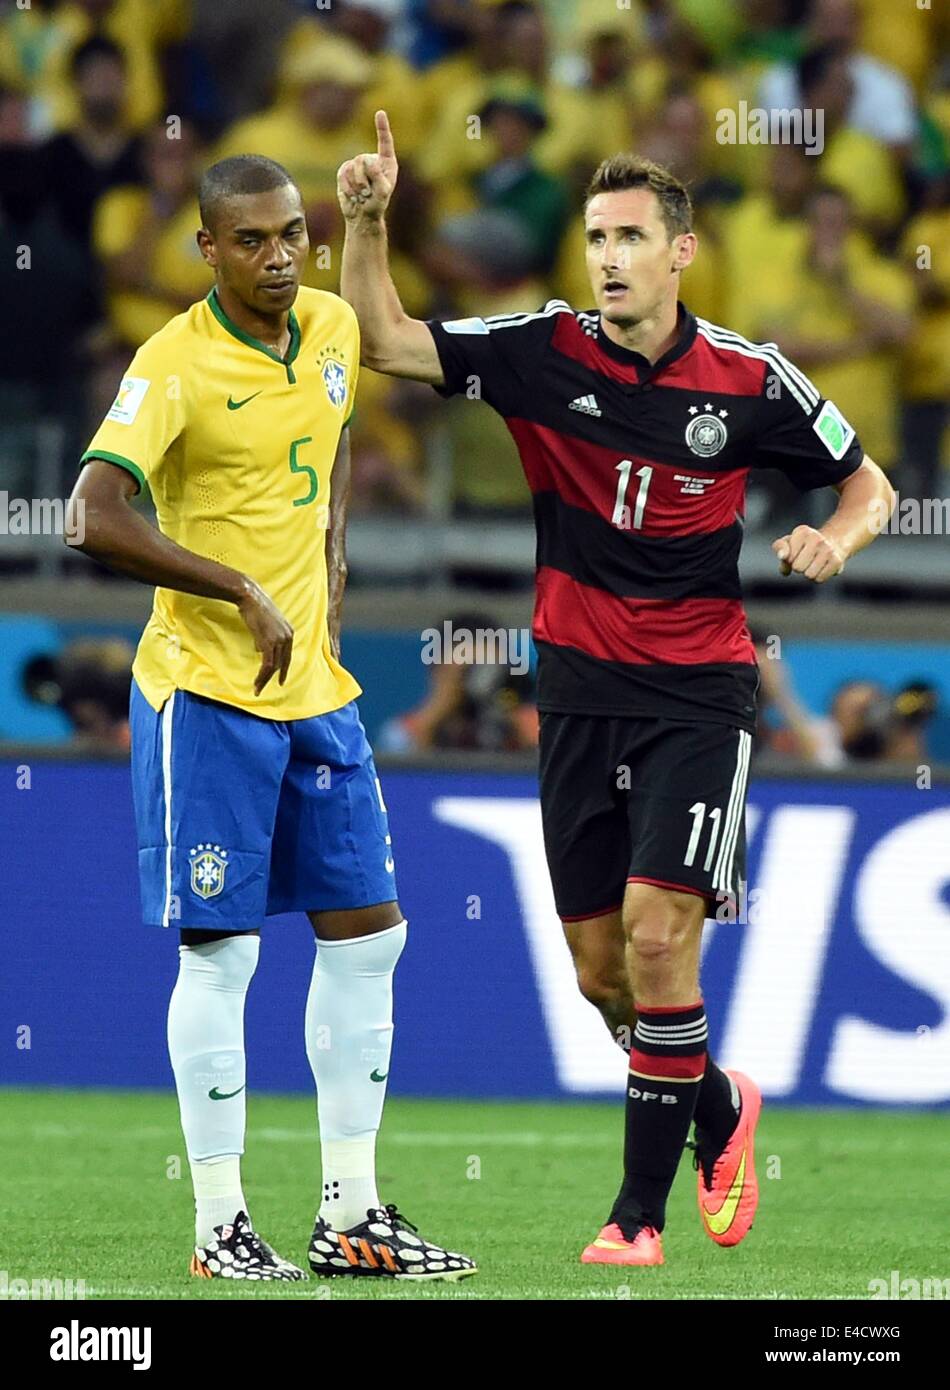 Belo Horizonte, Brazil. 8th July, 2014. Germany's Miroslav Klose (R) celebrates a goal during a semifinal match between Brazil and Germany of 2014 FIFA World Cup at the Estadio Mineirao Stadium in Belo Horizonte, Brazil, on July 8, 2014. Germany won 7-1 over Brazil and qualified for the final on Tuesday. Credit:  Liu Dawei/Xinhua/Alamy Live News Stock Photo